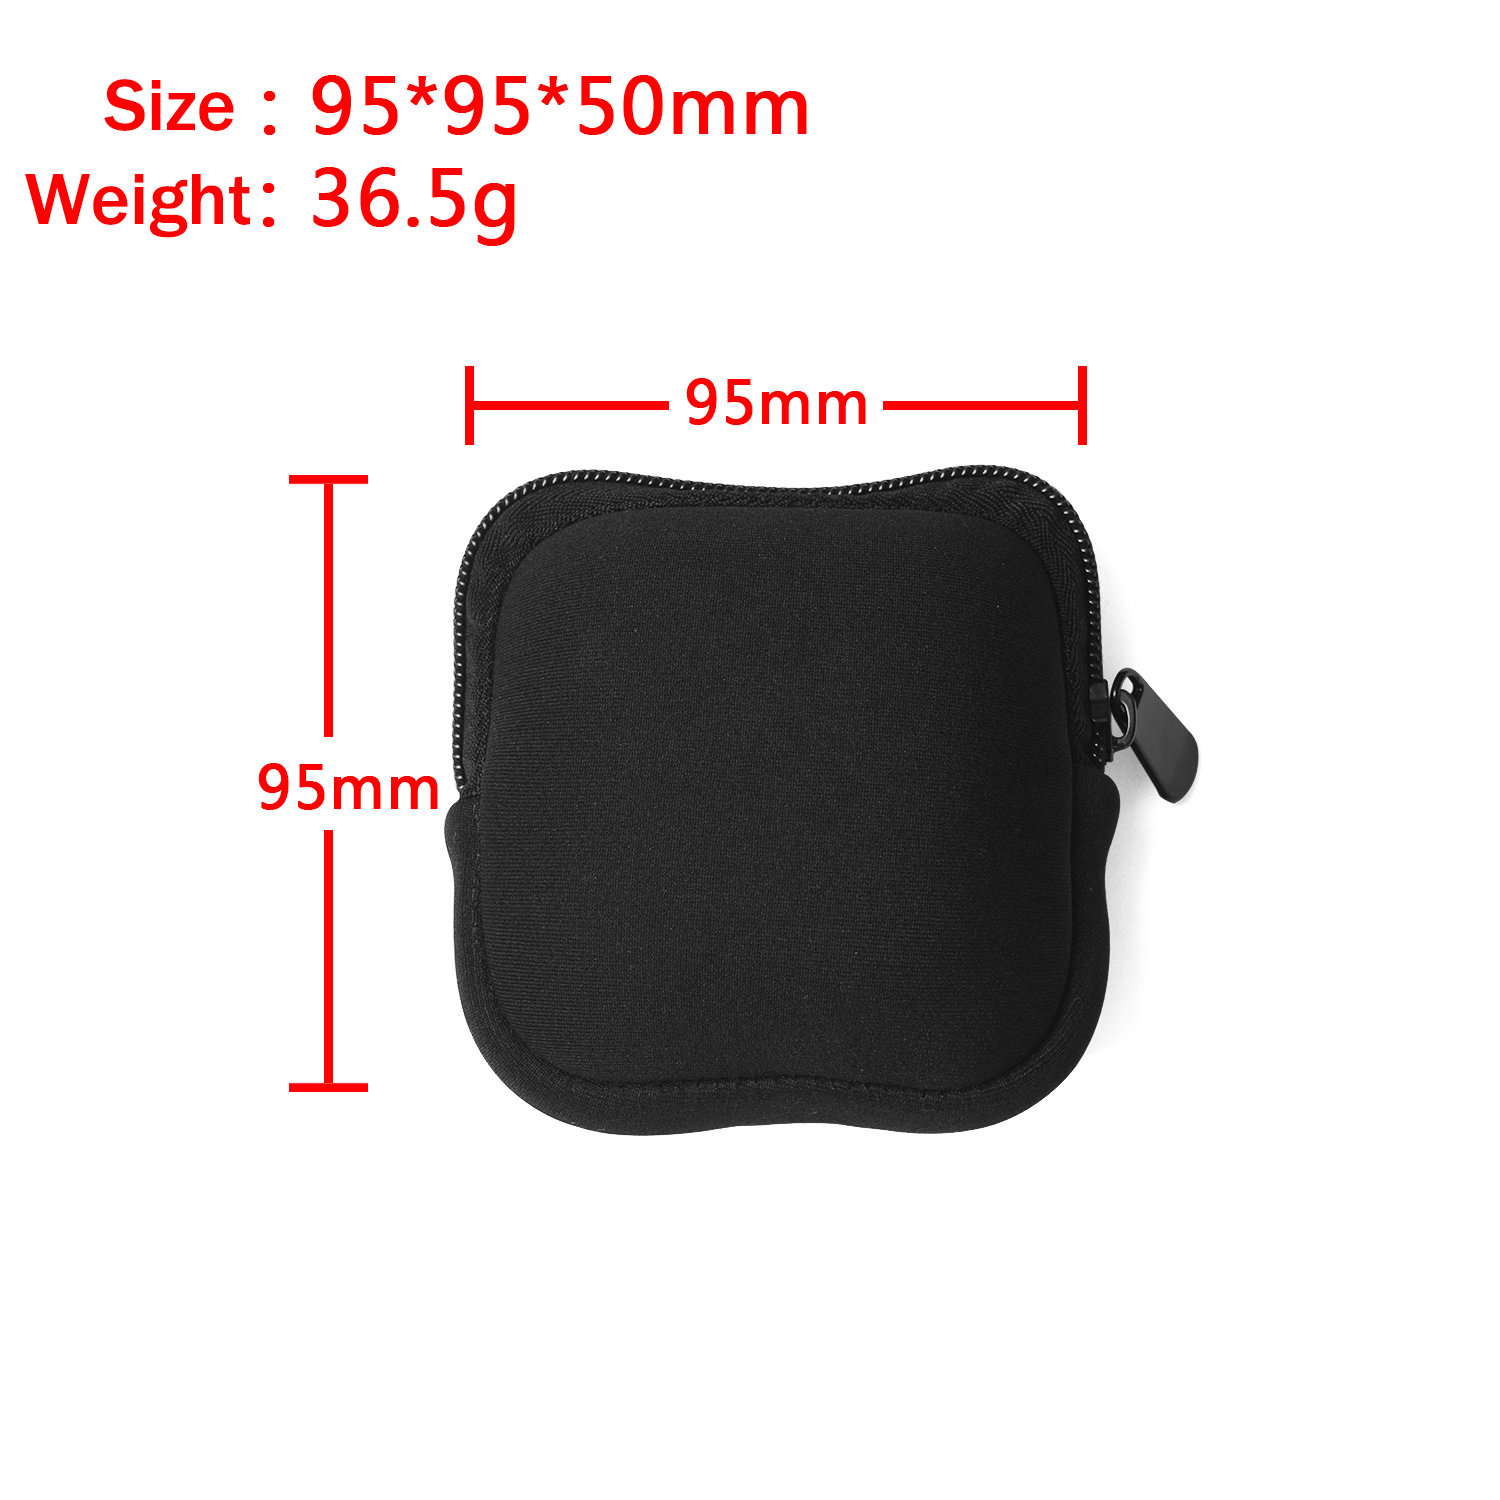 Bakeey-Earphone-Storage-Bag-Wireless-bluetooth-Headset-Protective-Carrying-Case-Dustproof-Portable-S-1800555-7